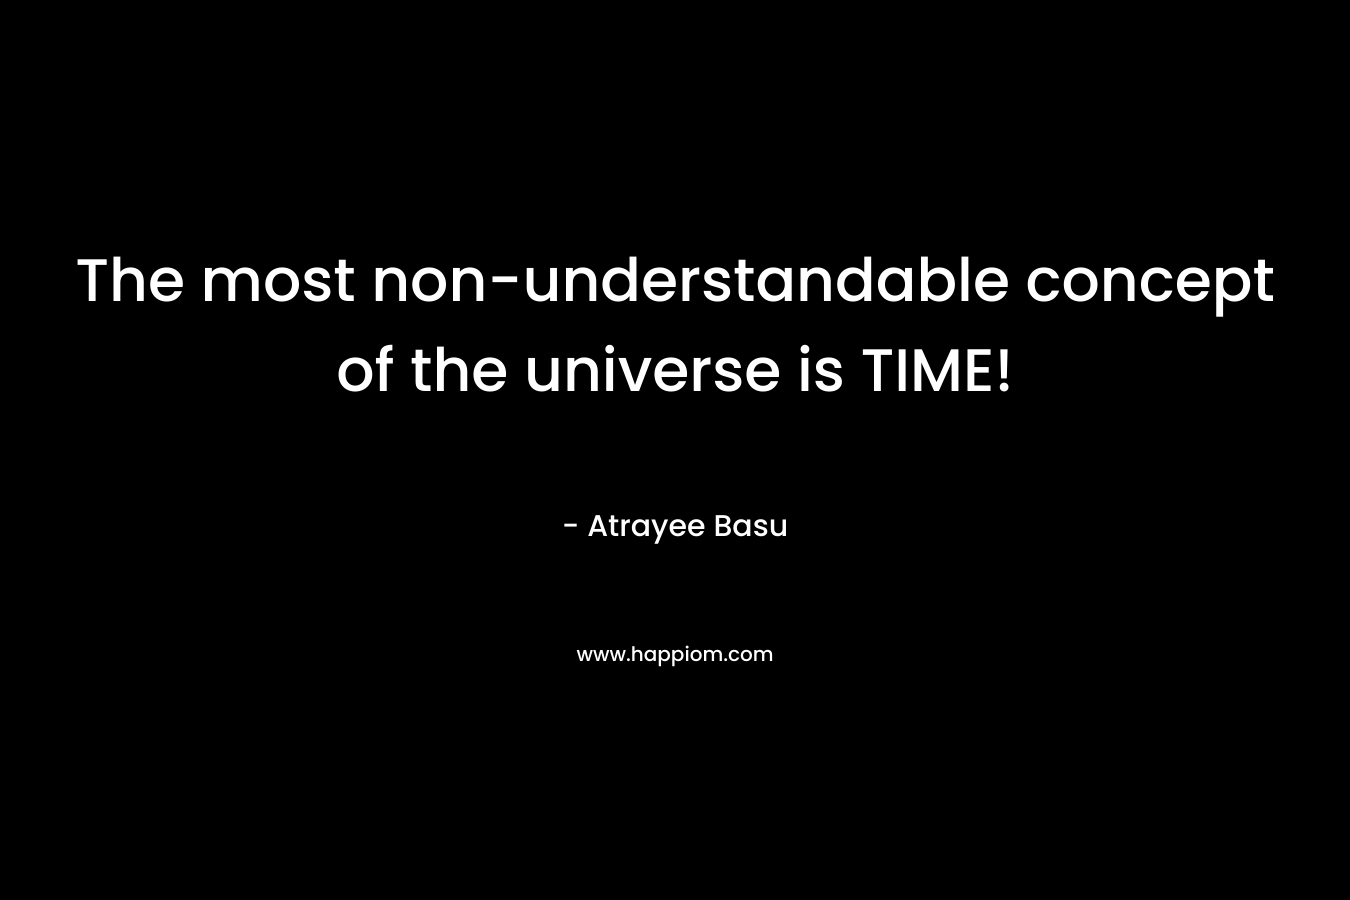 The most non-understandable concept of the universe is TIME! – Atrayee Basu